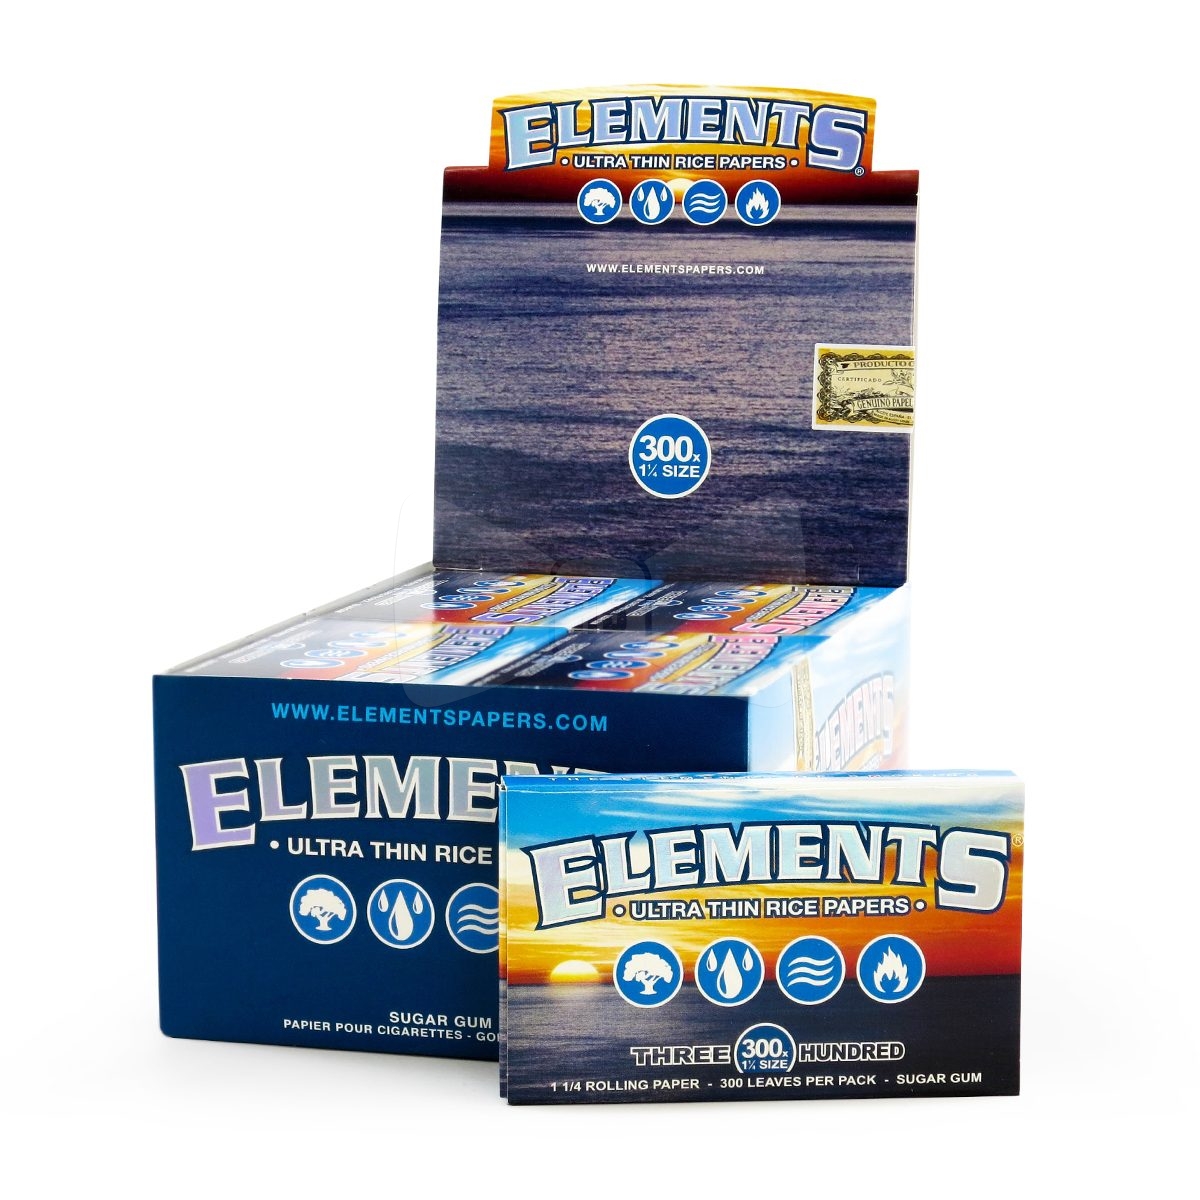 Elements 300 Rolling Papers Box